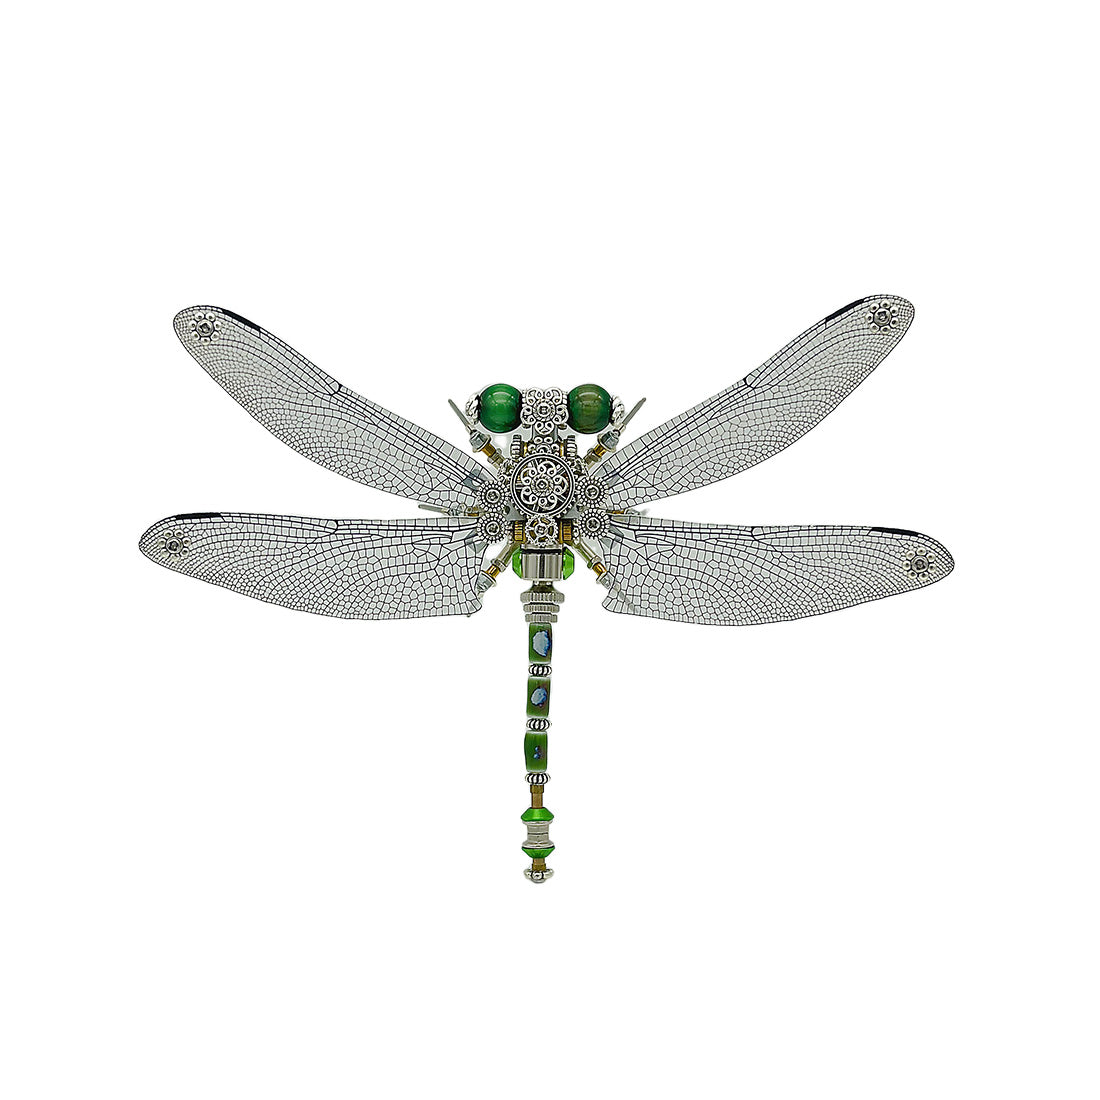 3pcs/set Steampunk Dragonfly 3D Metal Puzzle for Adults